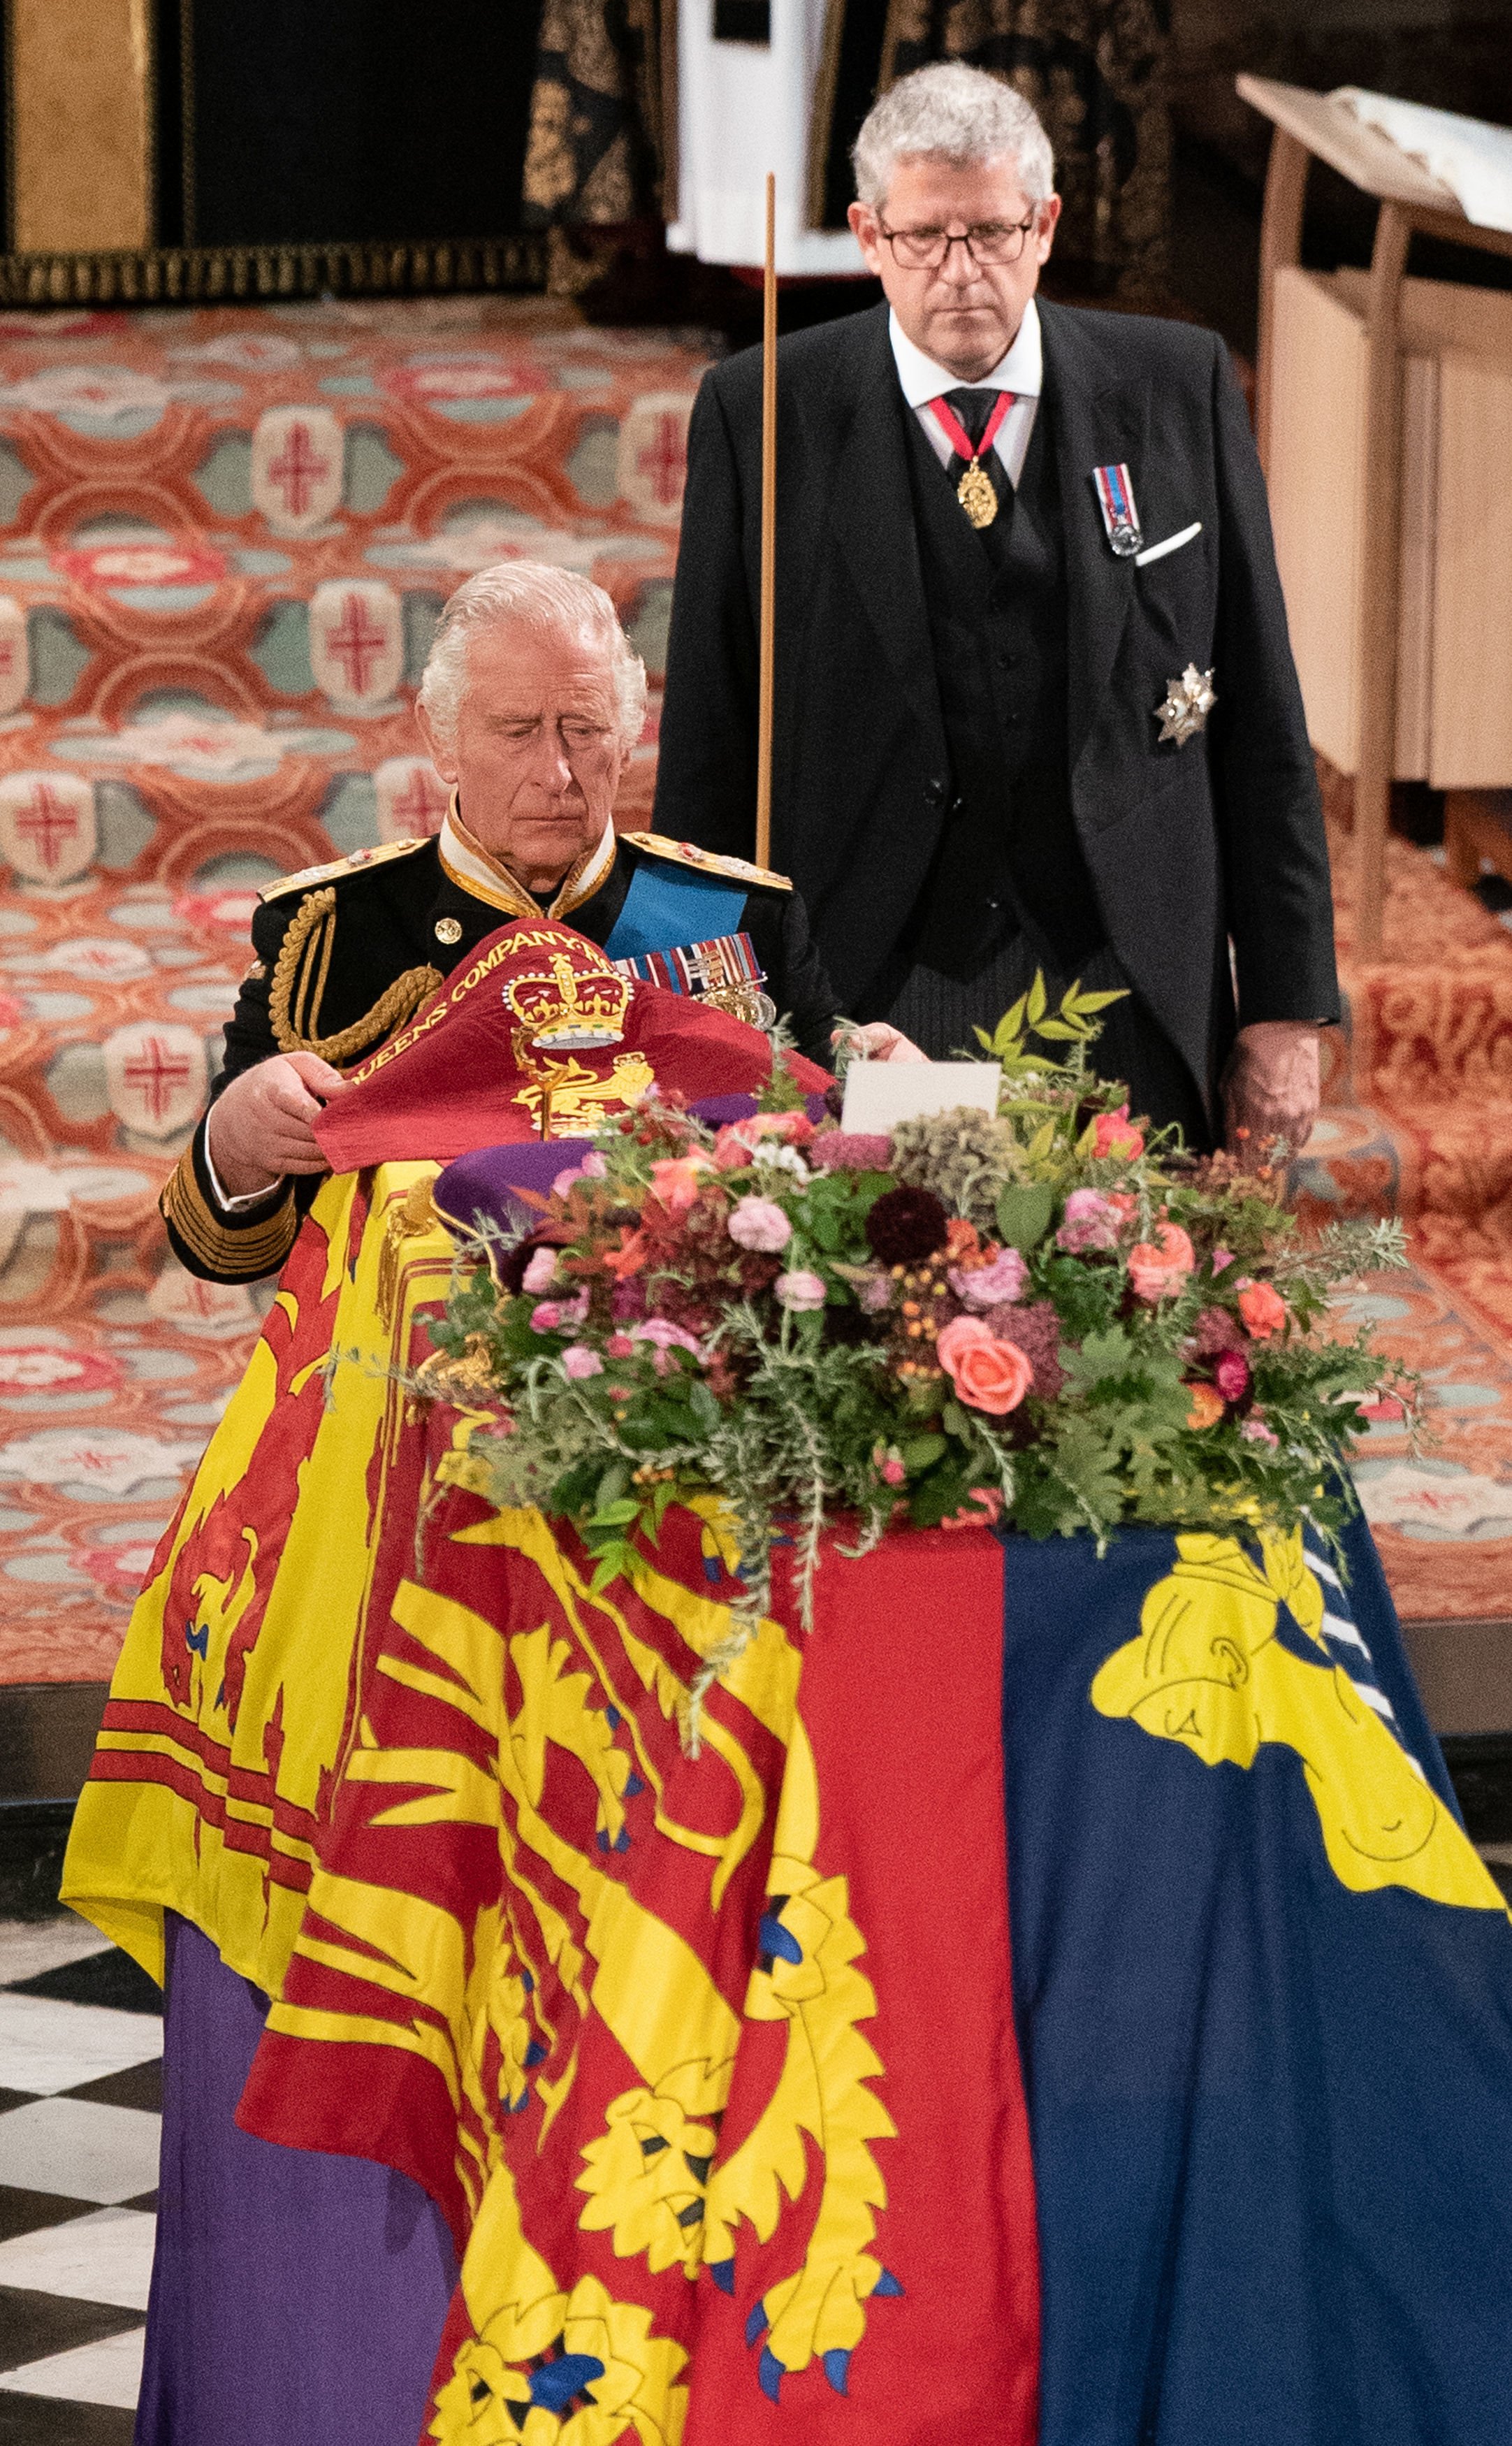 King Charles III places the Queen's Company Camp Colour of the Grenadier Guards on the coffin during the Committal Service at St George's Chapel in Windsor Castle on September 19, 2022 in Windsor, England | Source: Getty Images 